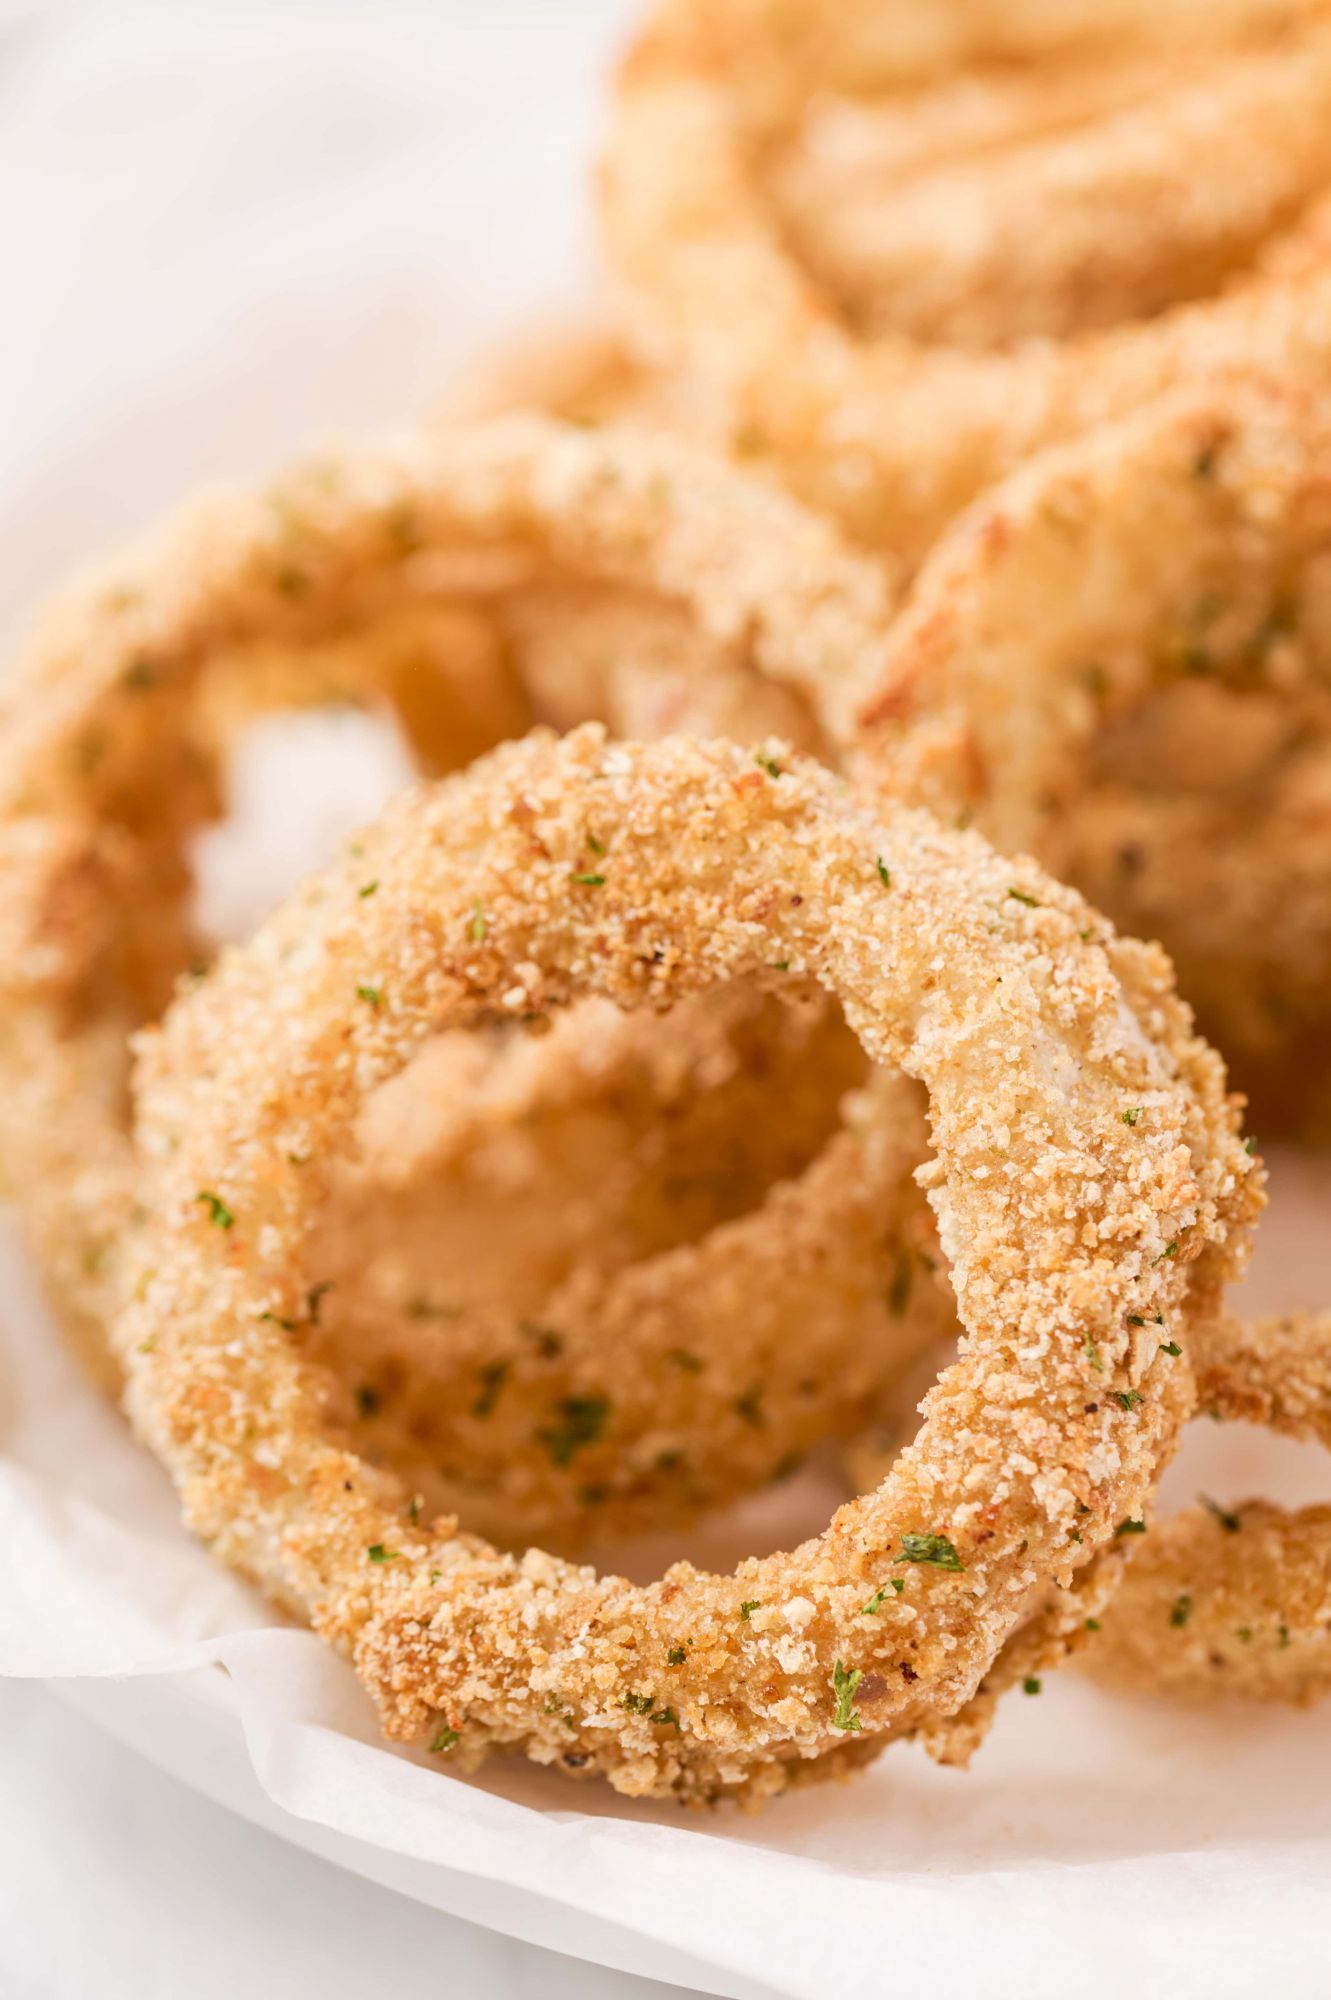 Homemade onion rings baked with breadcrumbs on a plate with herbs and seasoned salt.